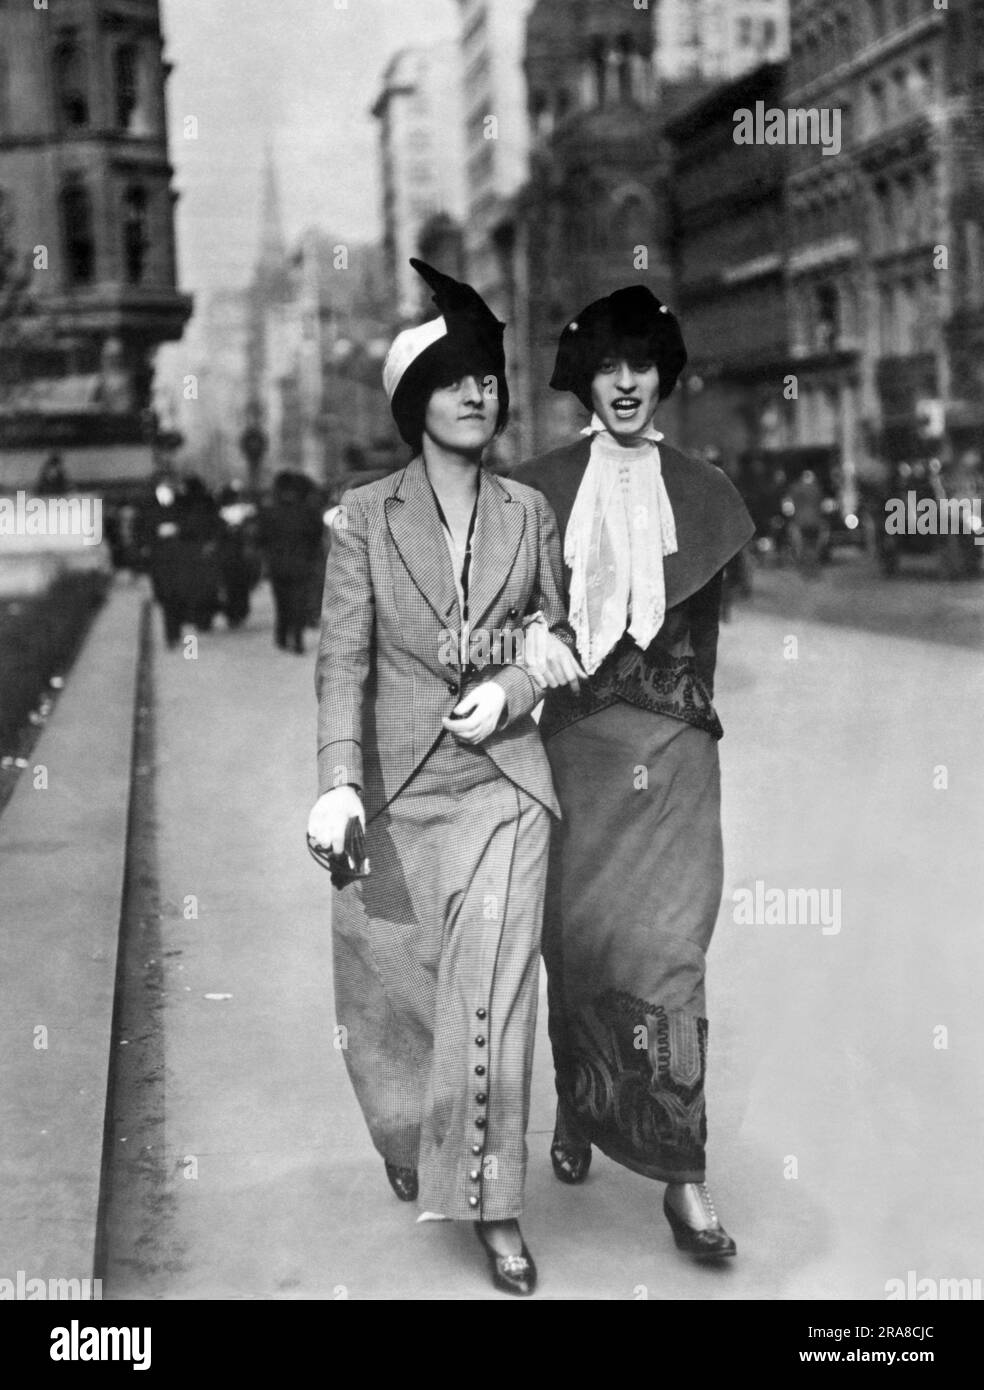 United States:  c. 1913 Two fashionable young women walking down a city street. Stock Photo